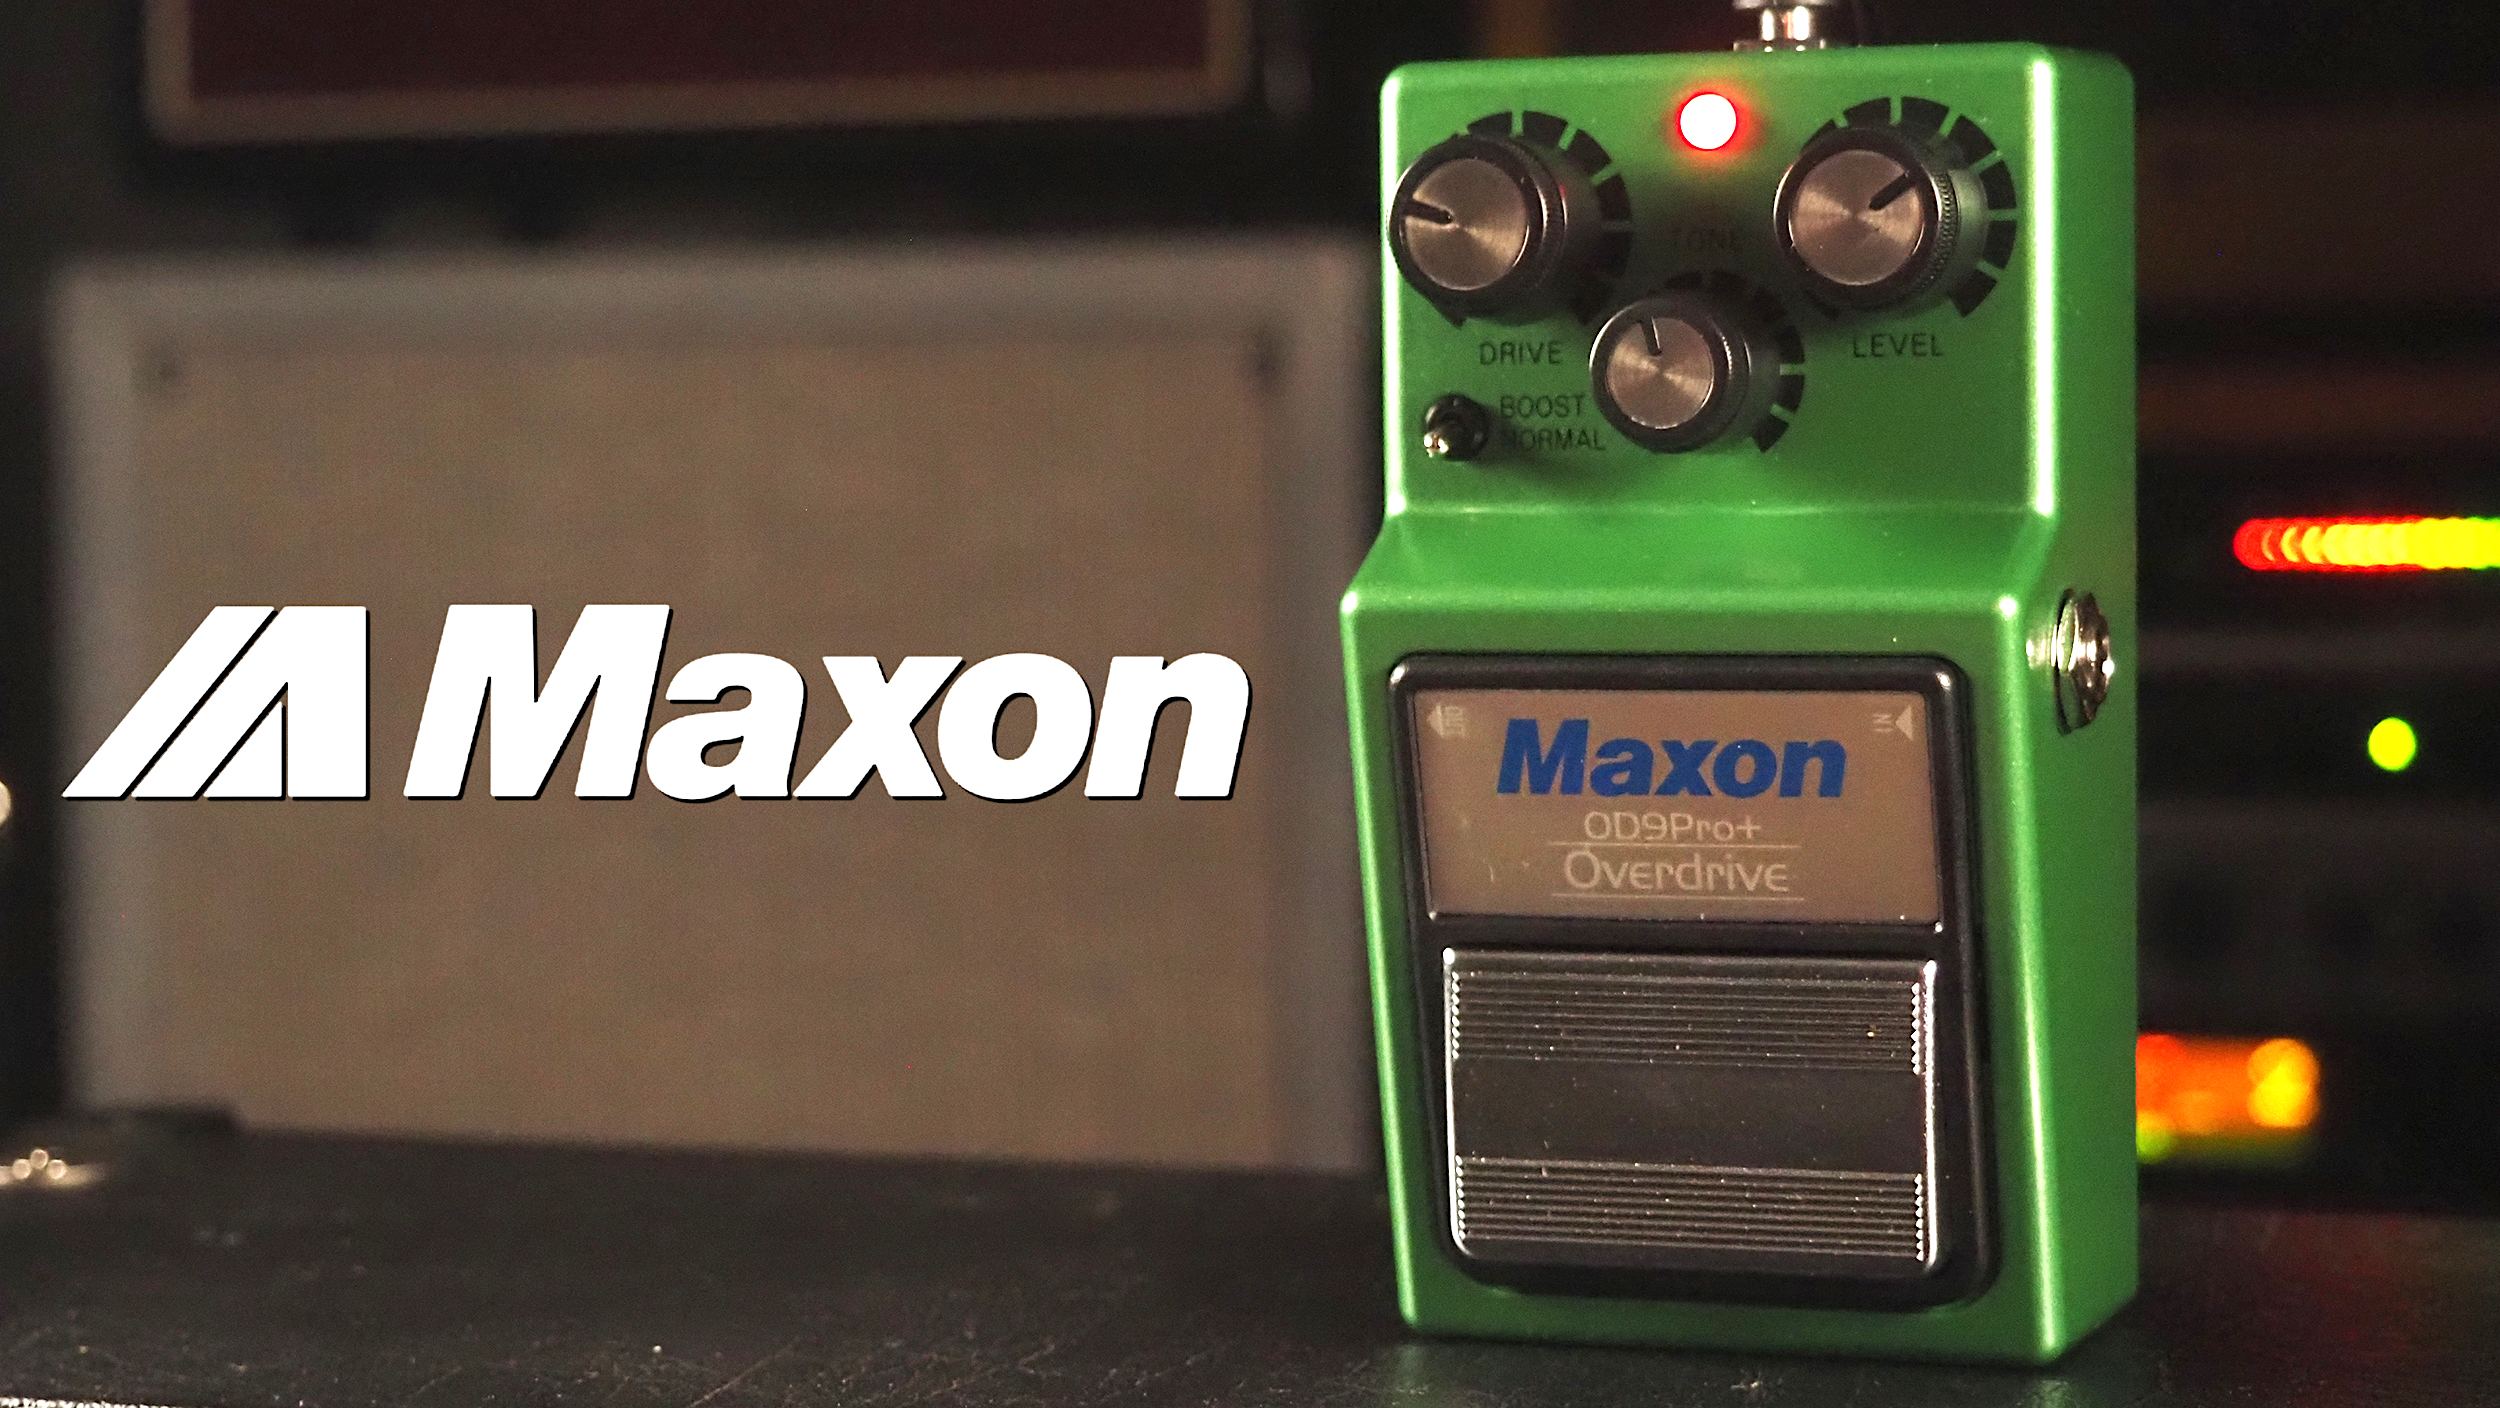 Maxon Overdrive Pro Plus (OD-9 Pro+) - Pedal of the Day